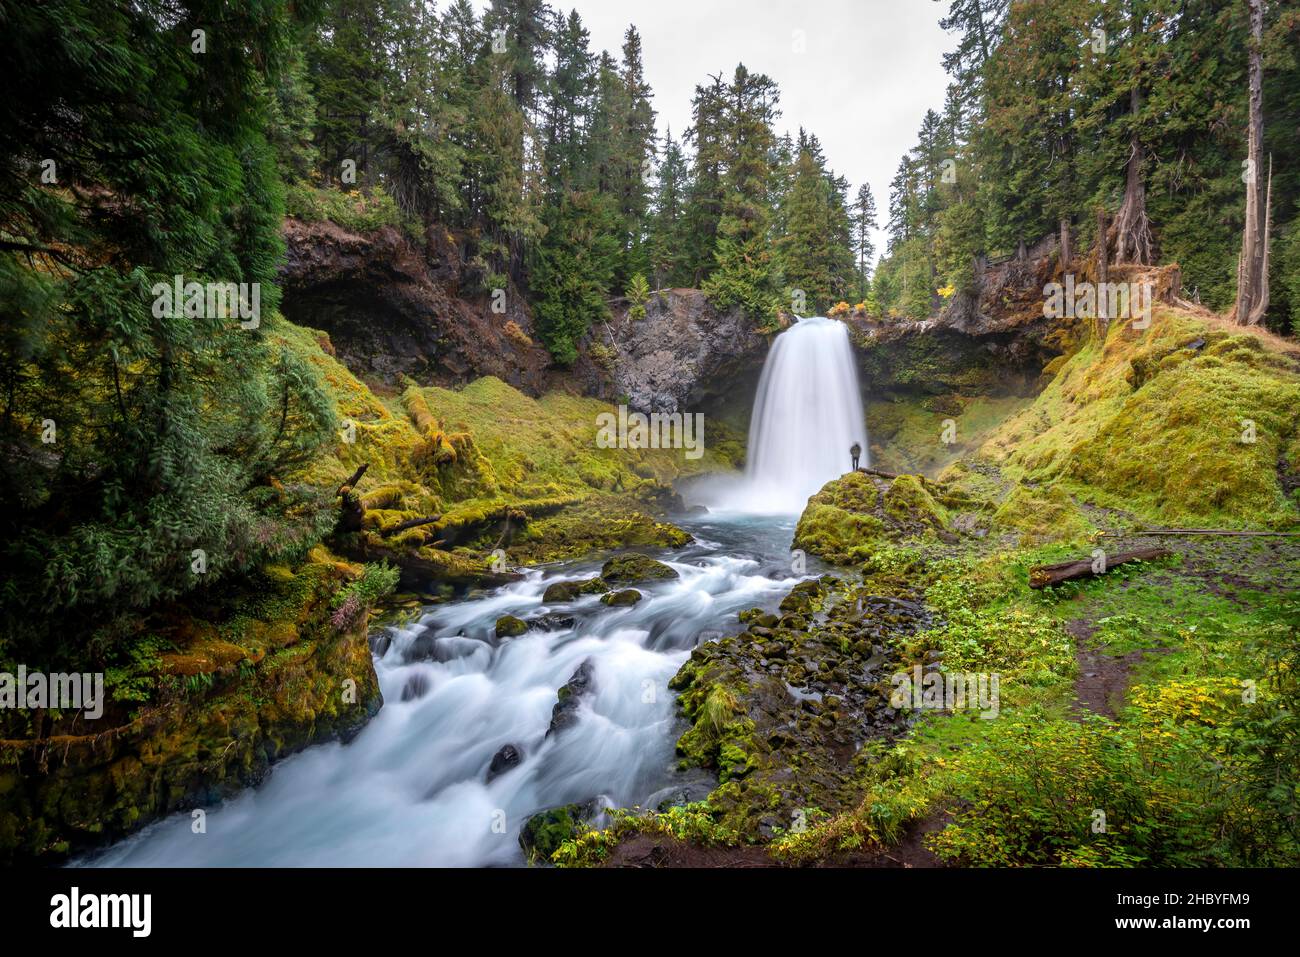 Young man in front of waterfall, long exposure, Sahalie Falls, forest with moss, Oregon, USA Stock Photo